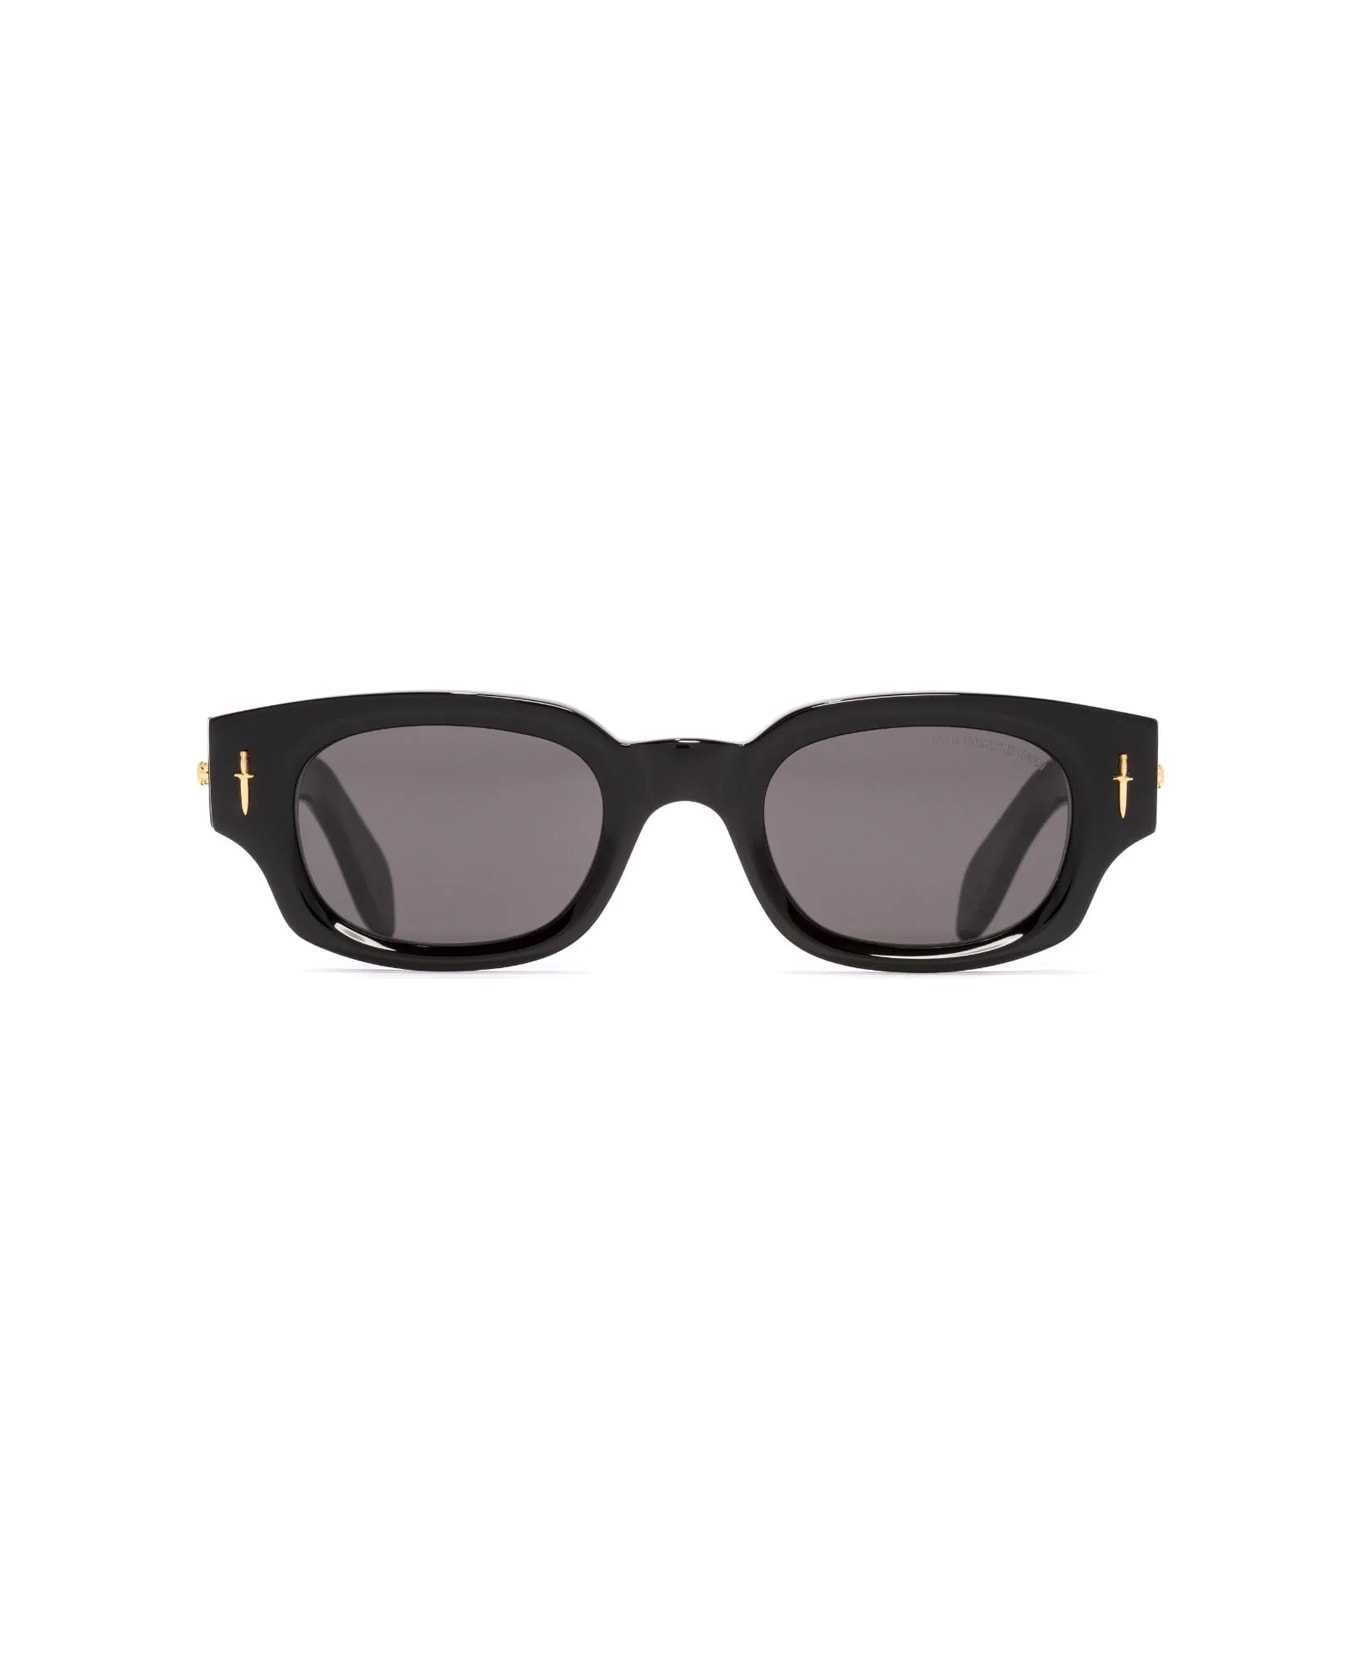 Cutler and Gross Great Frog 004 01 Gold Sunglasses - Nero サングラス